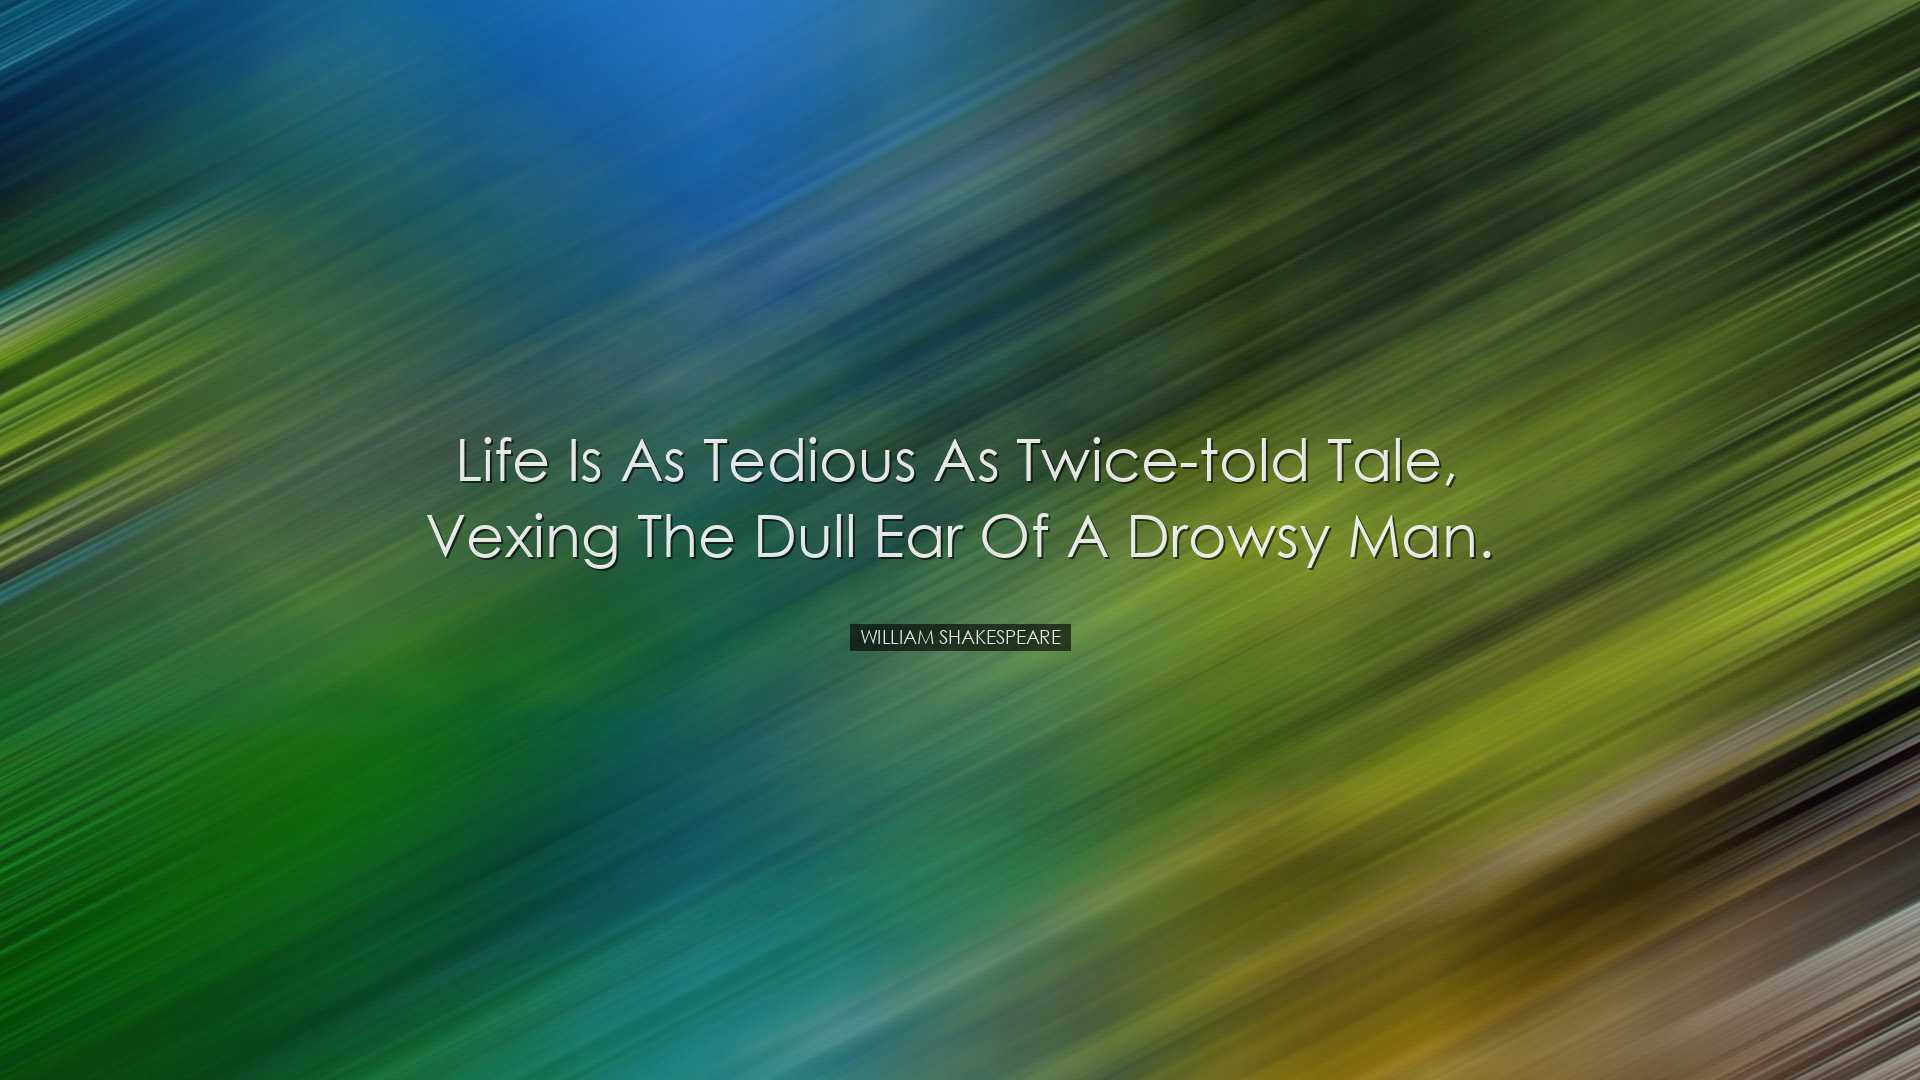 Life is as tedious as twice-told tale, vexing the dull ear of a dr